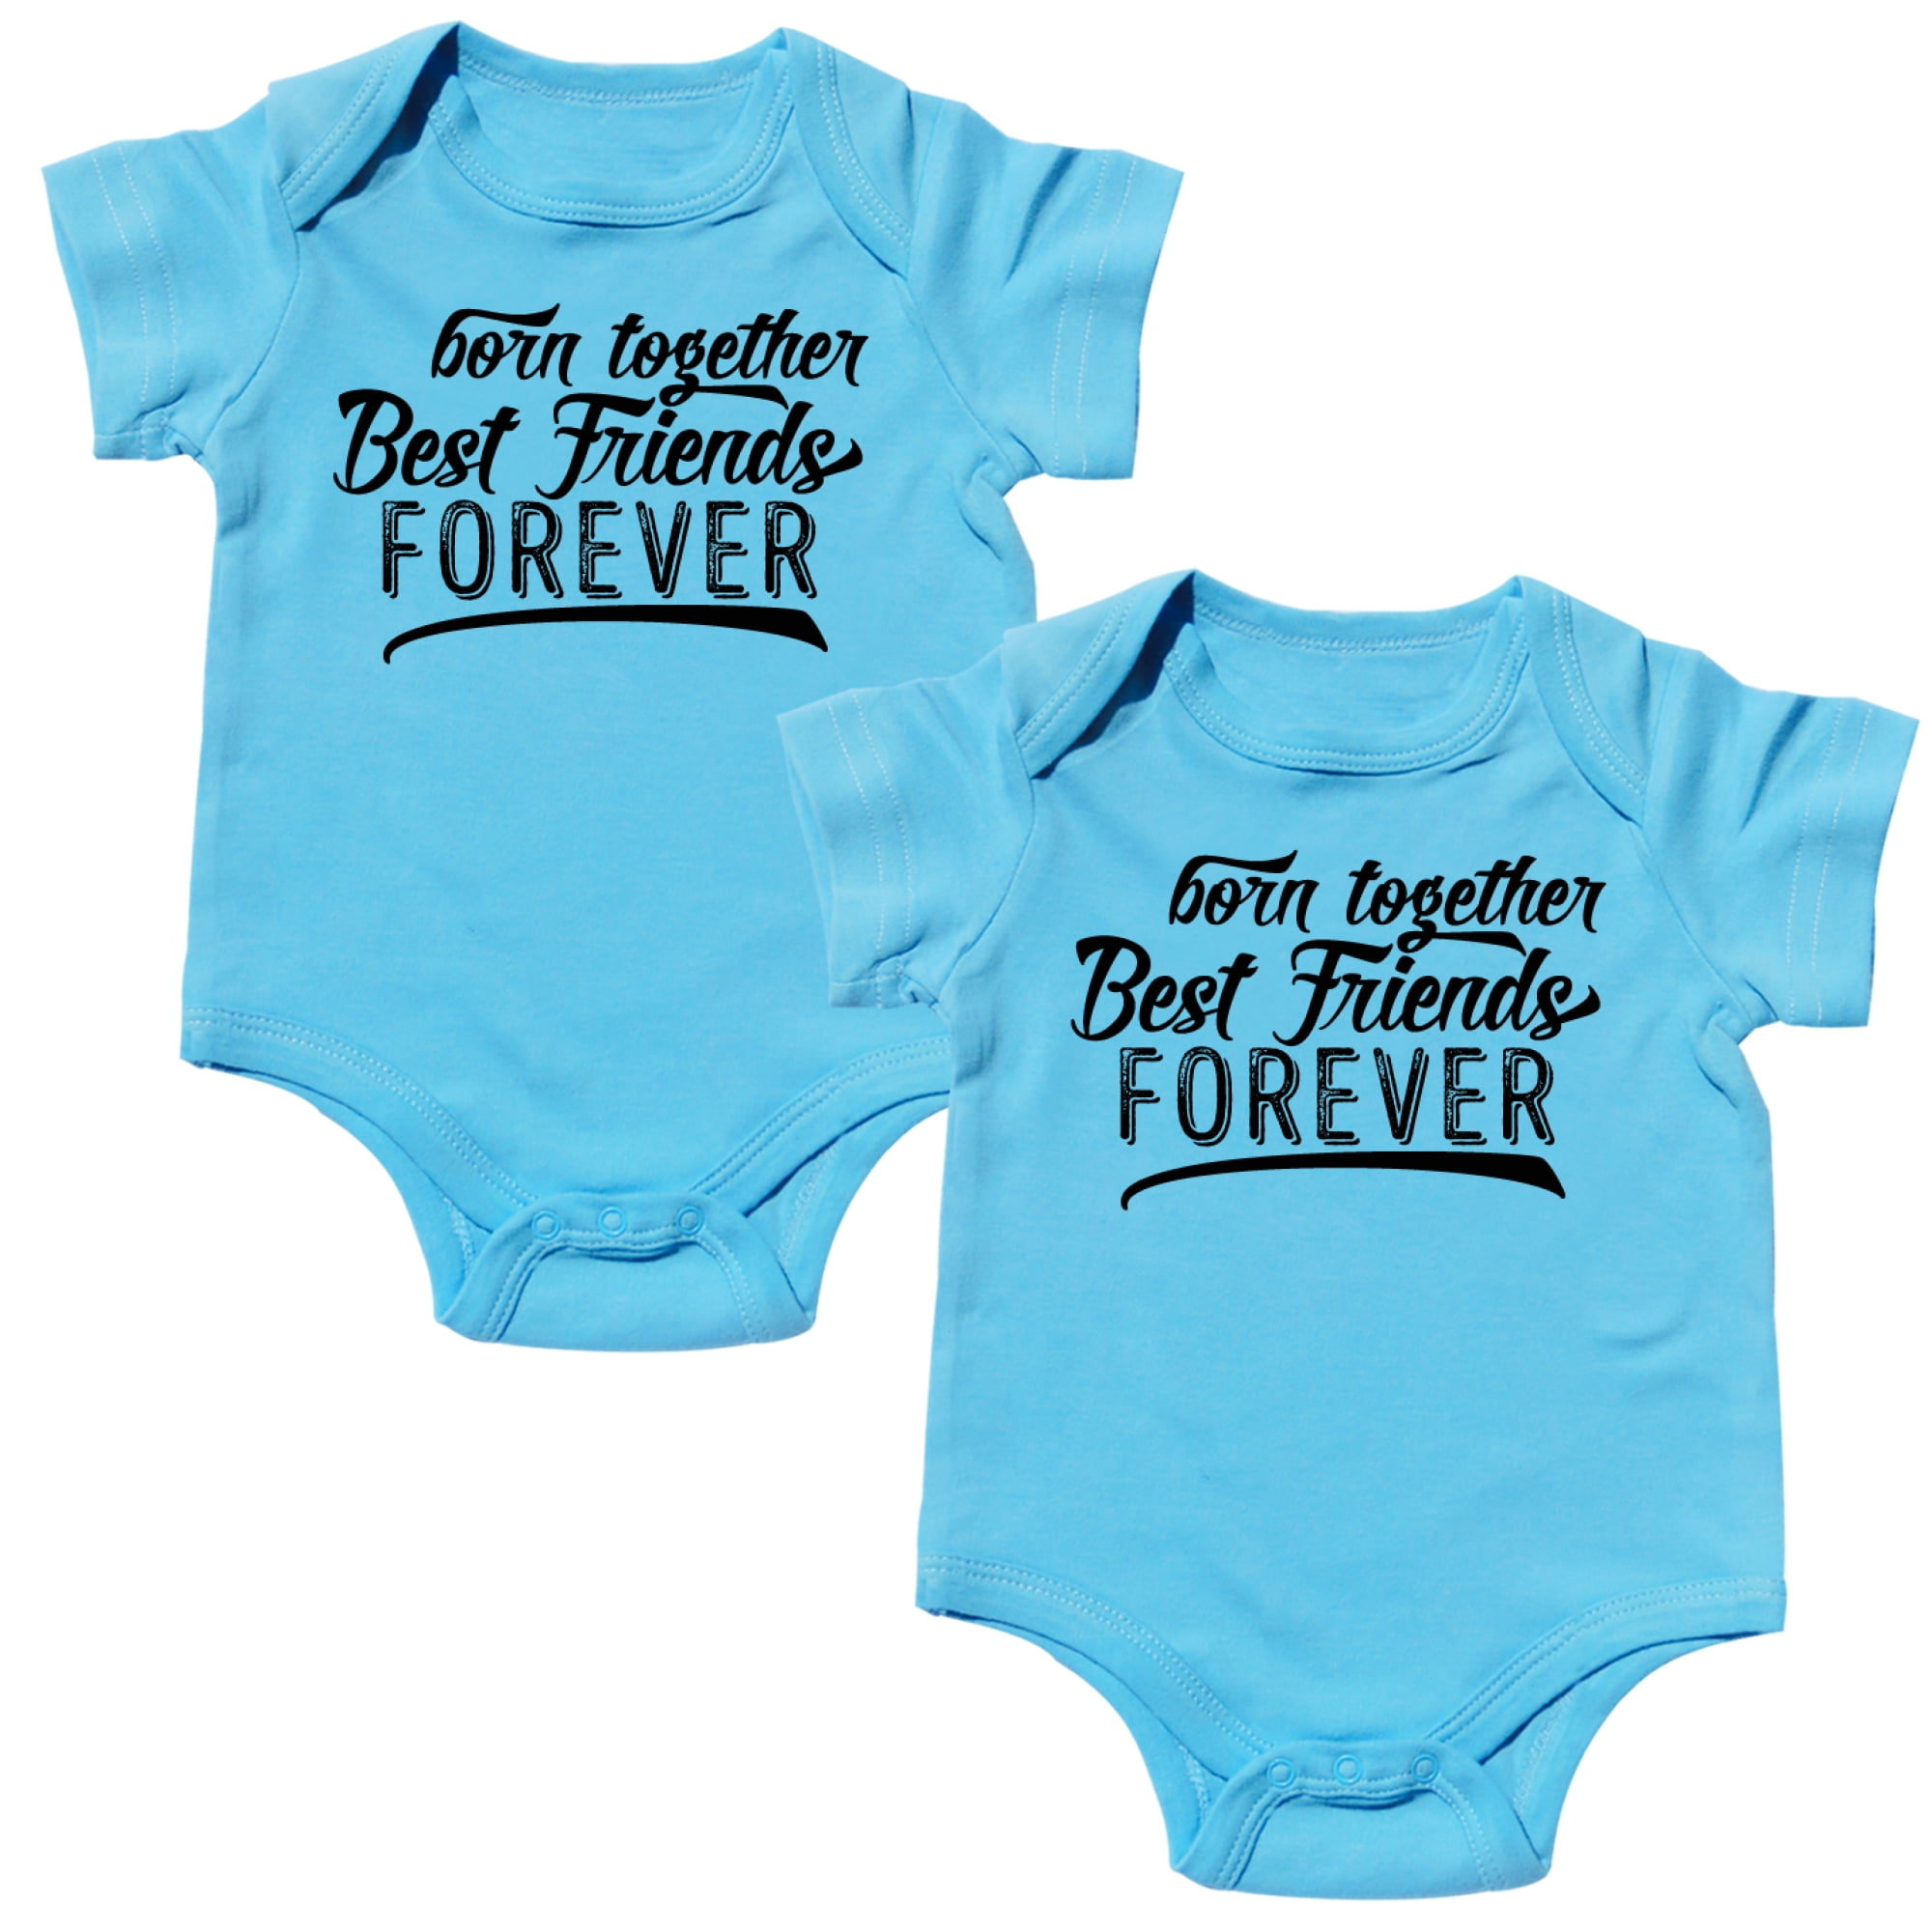 Baby tees pack Clothing Unisex Kids Clothing Tops & Tees Personalized gift New born gift Best friends forever Twins t-shirt set Sun and moon t-shirts Twins connection 